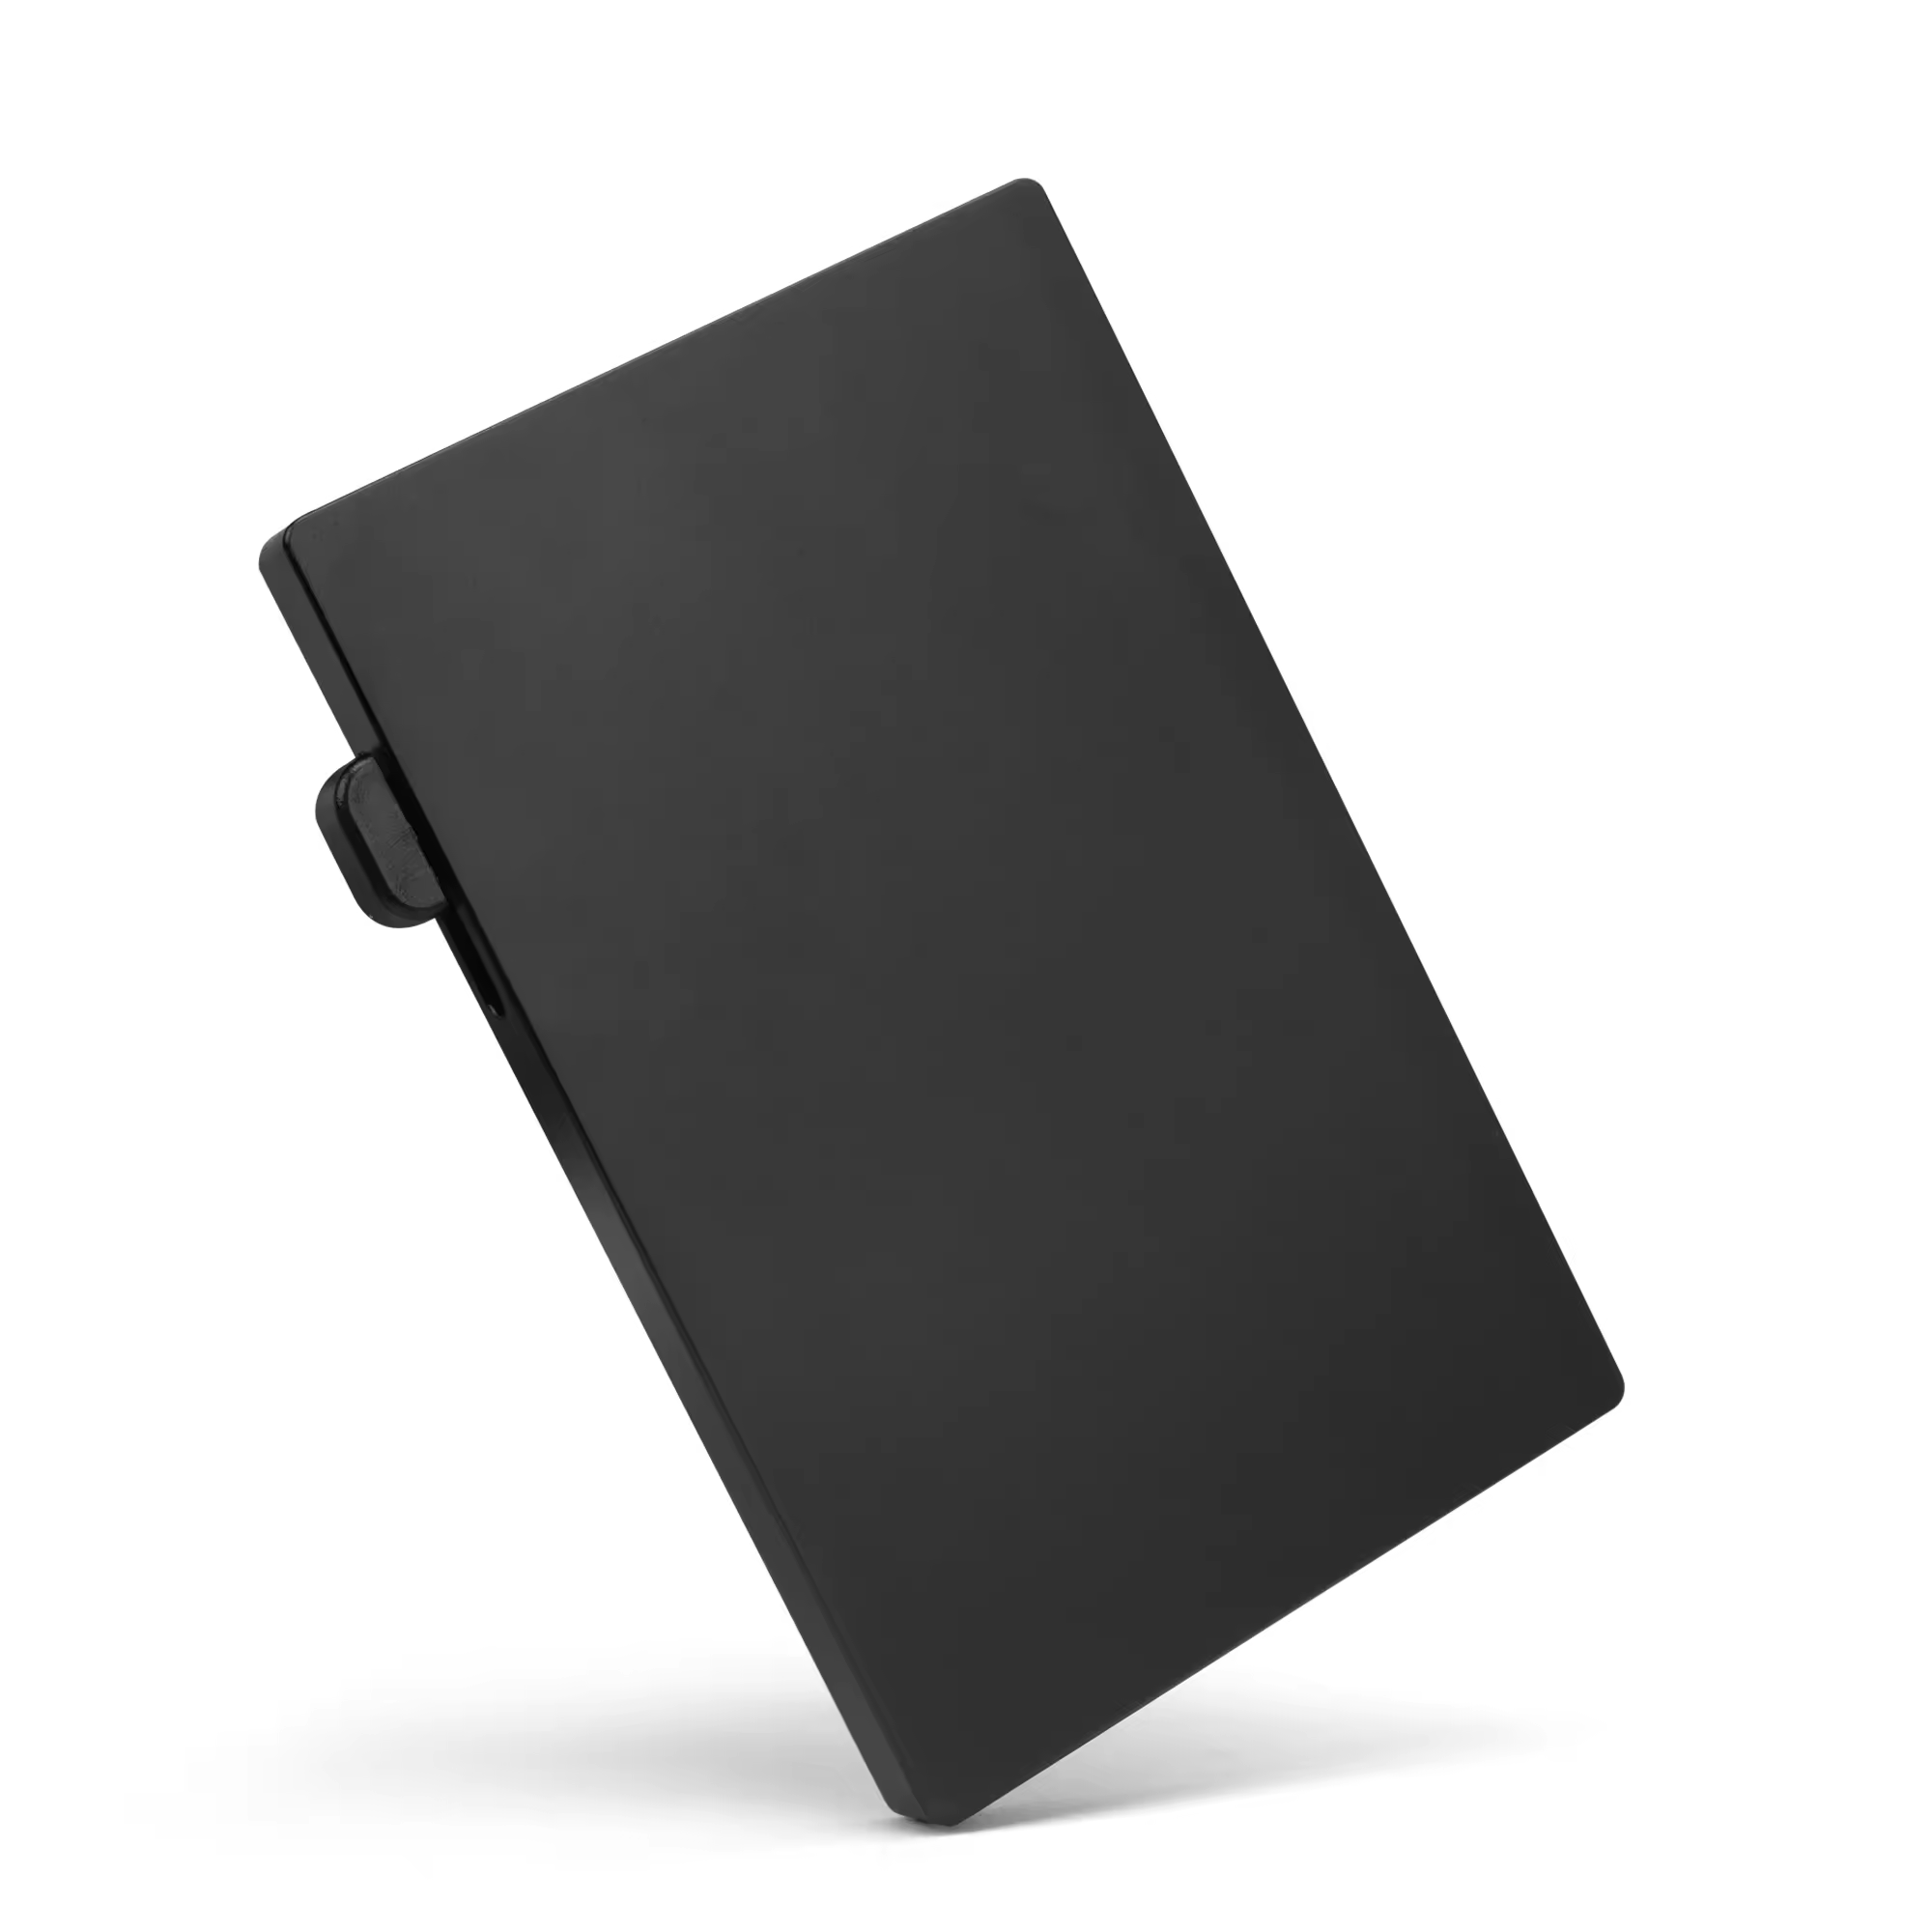 Introducing Our Innovative Aluminum Card Case: Combining Style, Security, and Patent Protection